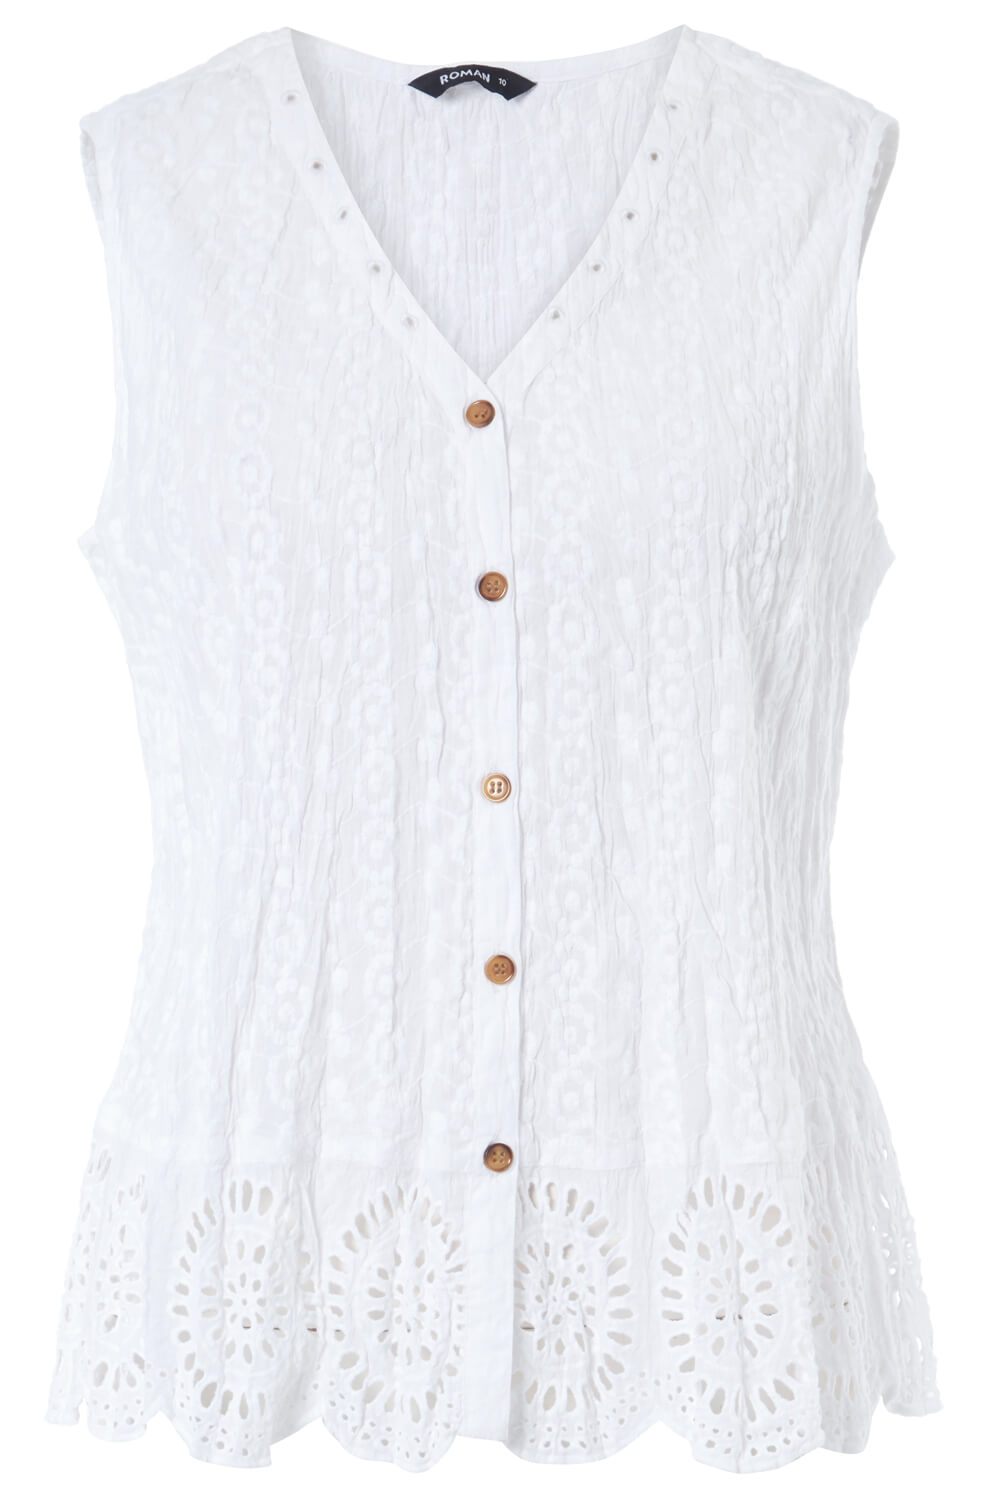 White Eyelet Detail Embroidered Crinkle Blouse, Image 4 of 4